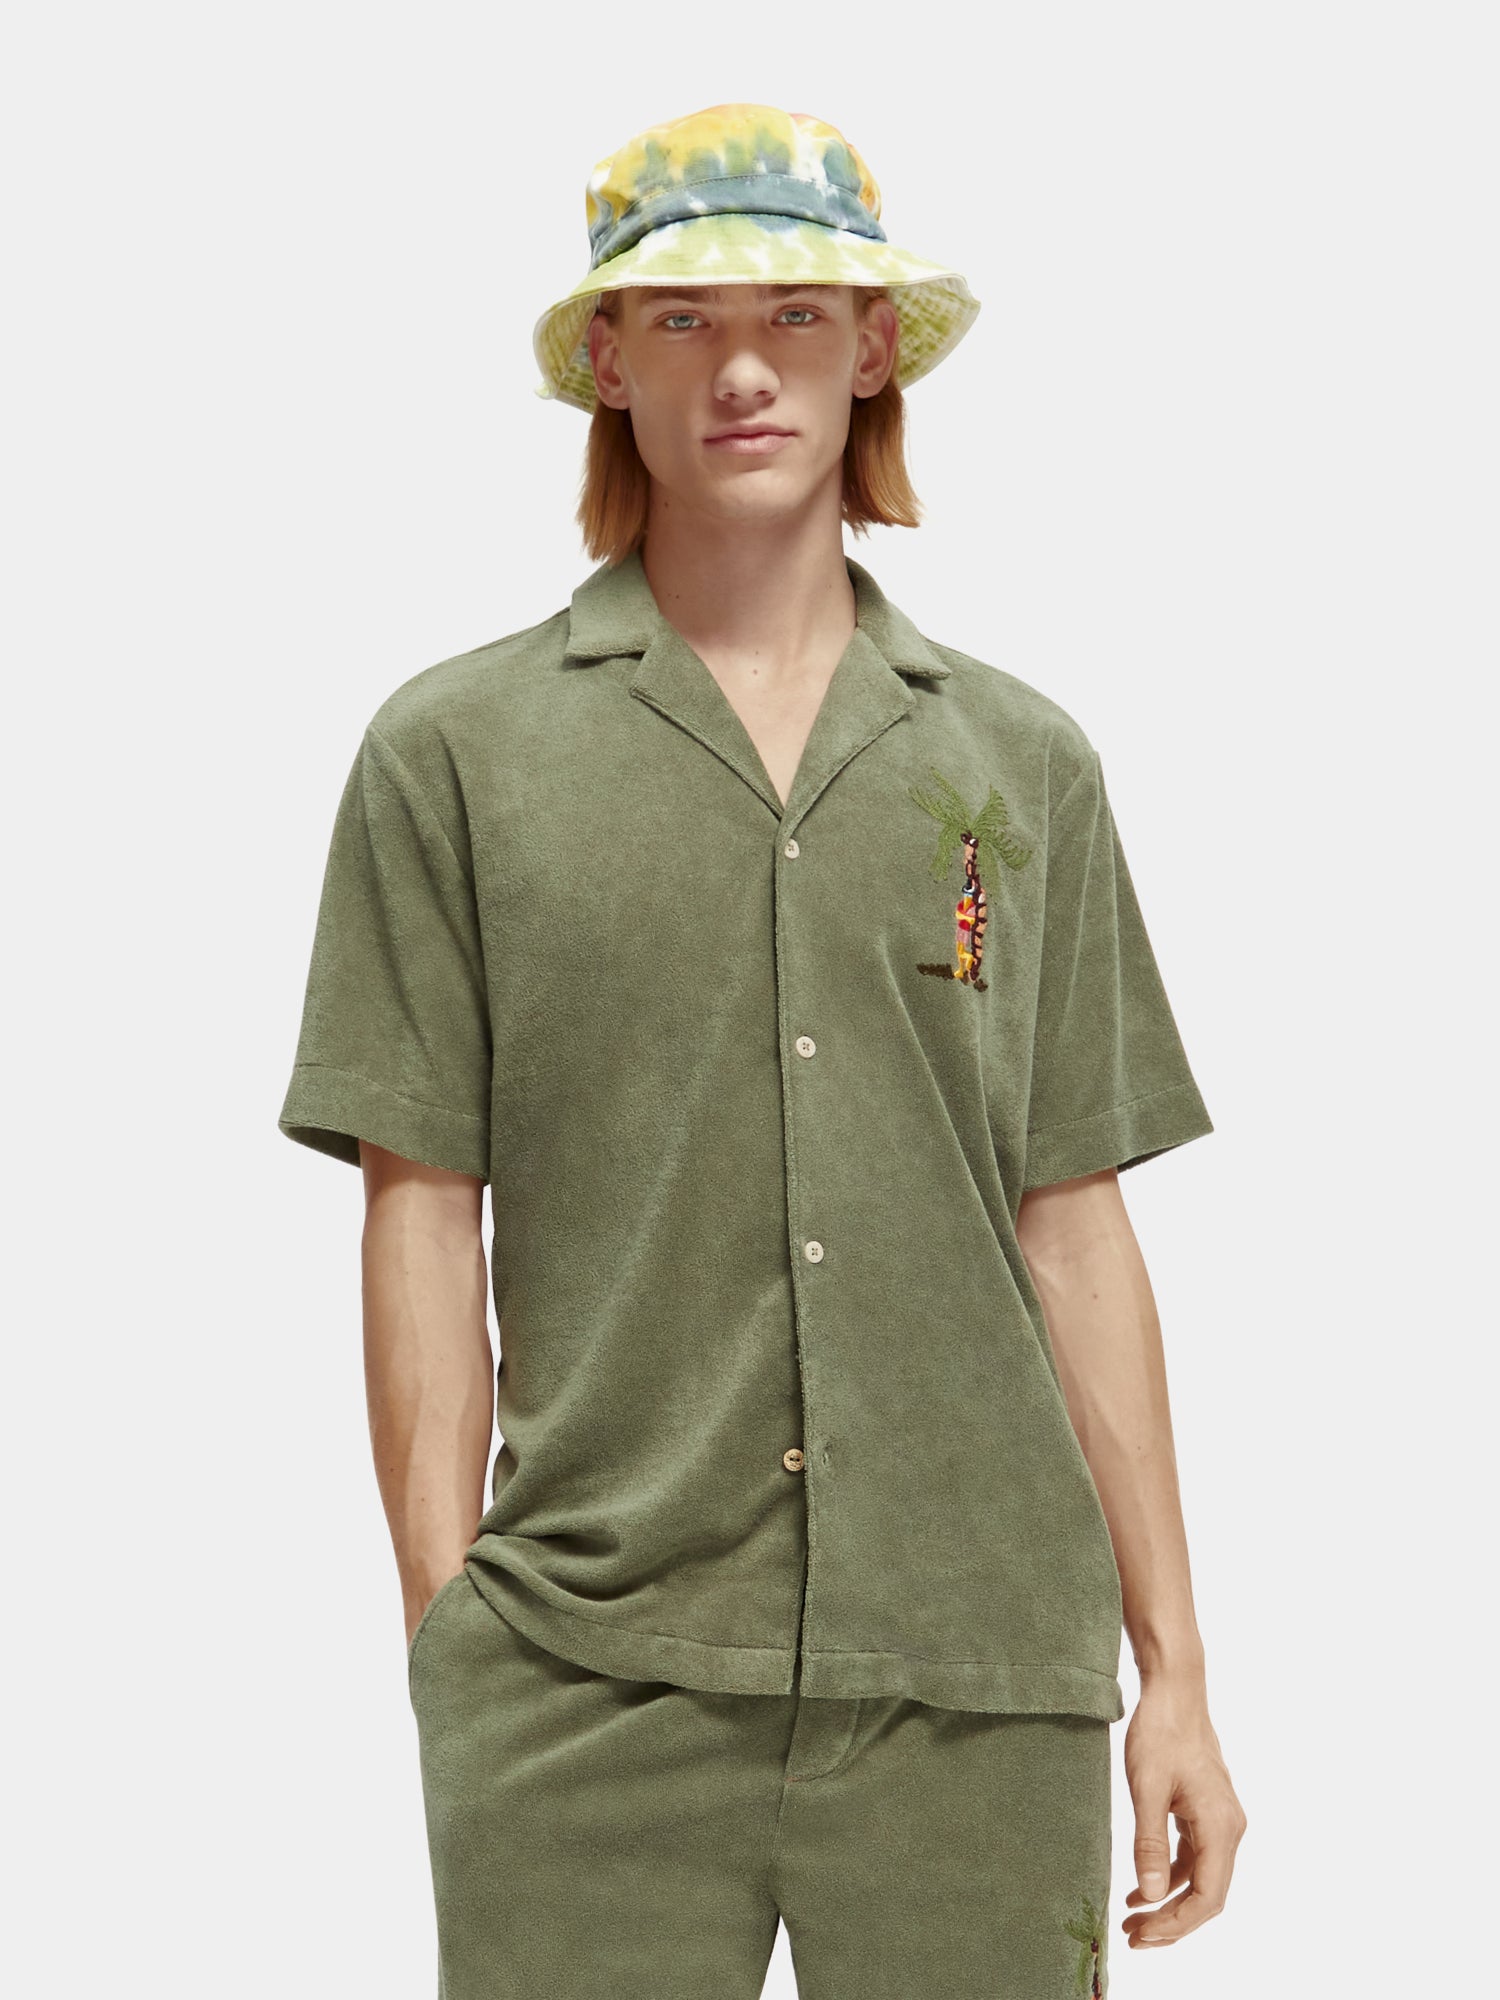 Toweling shirt with embroidery at chest - Army